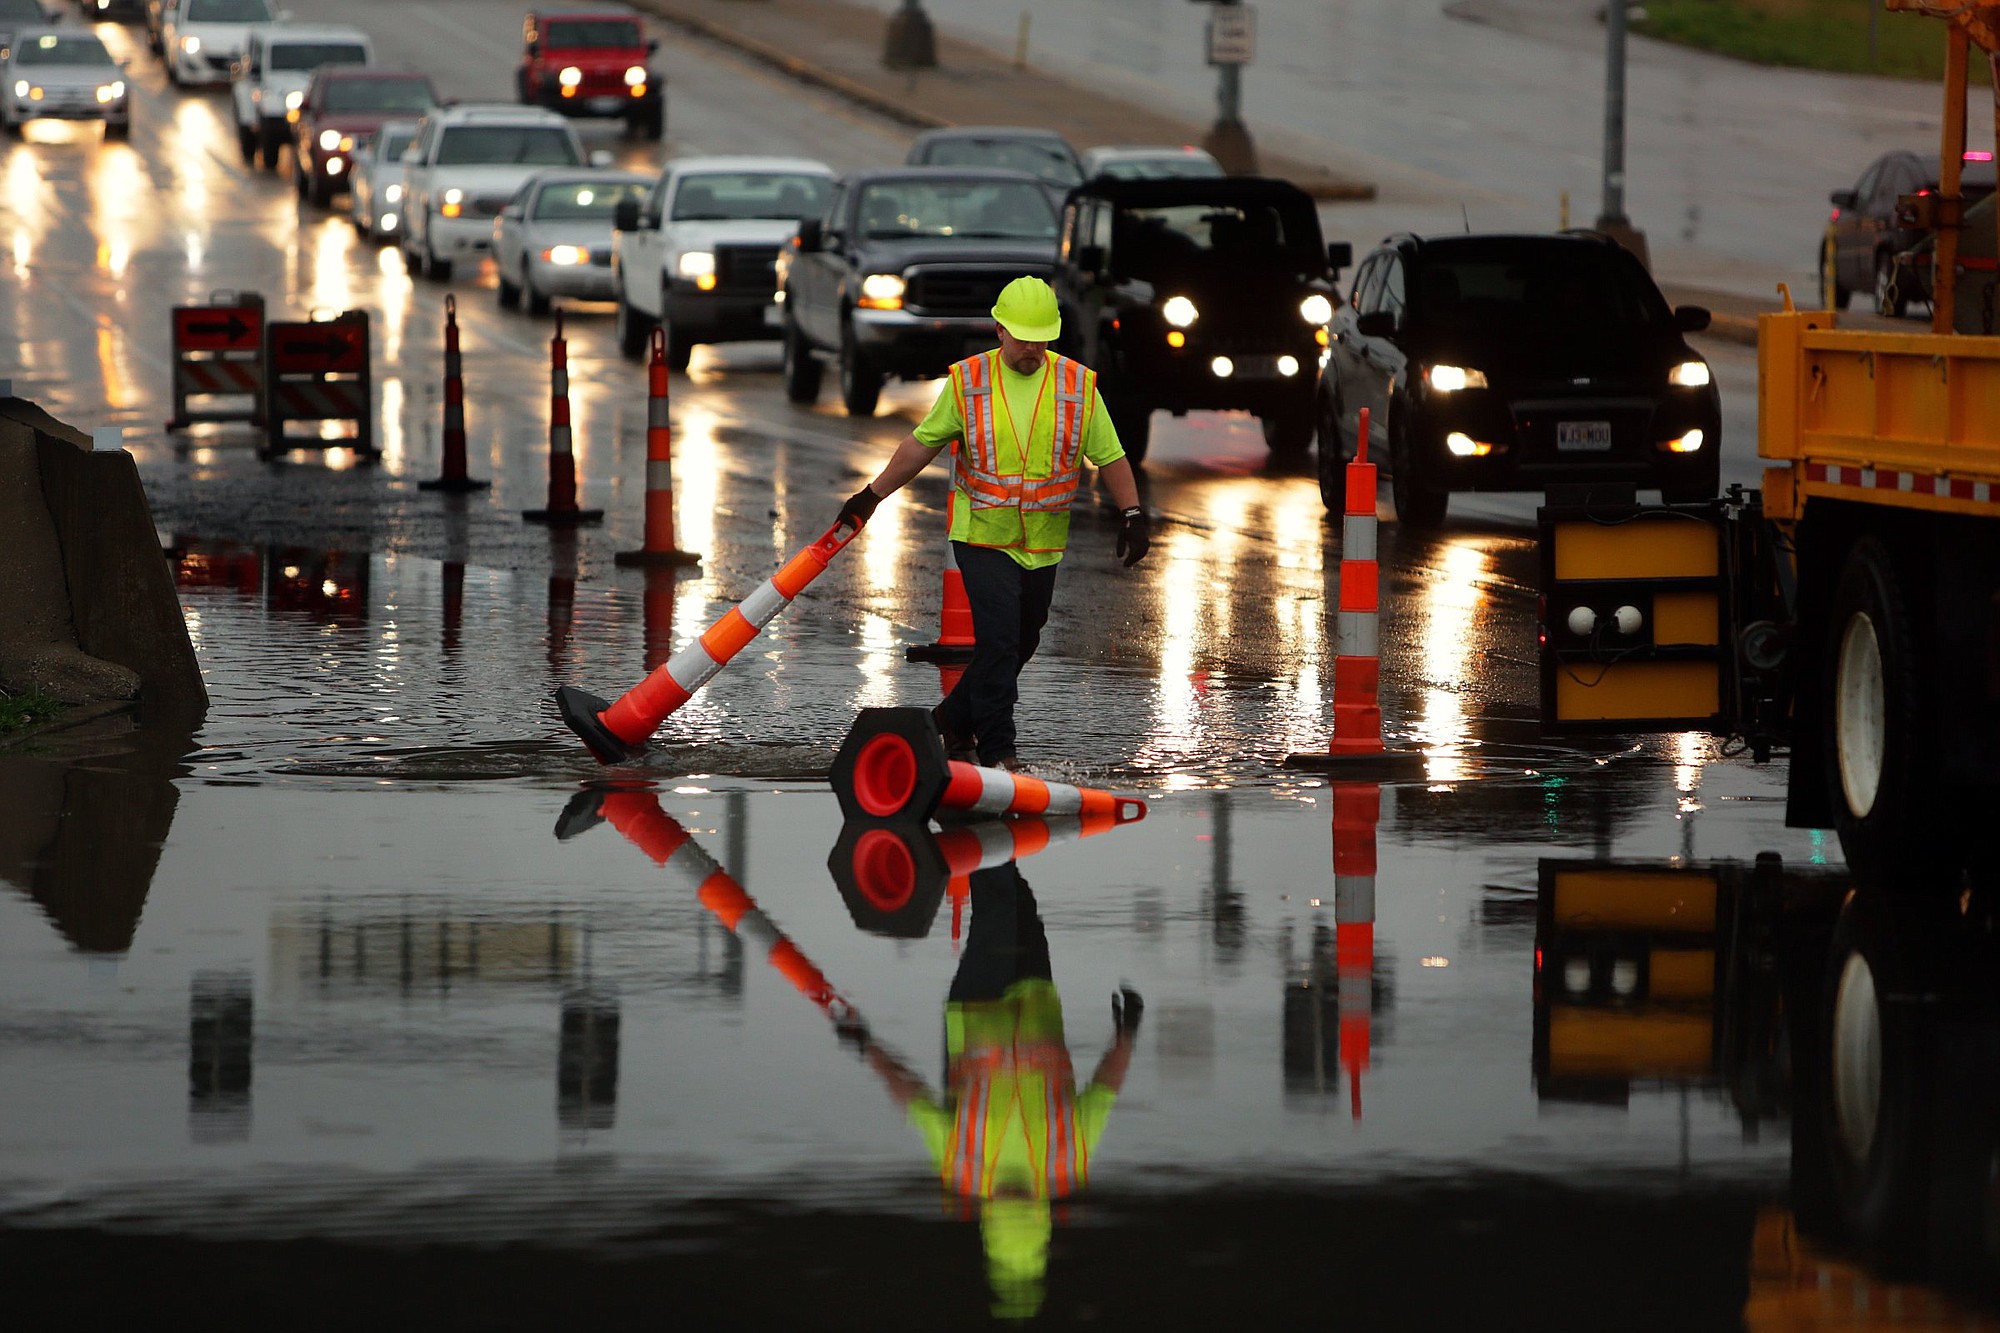 A Missouri Department of Transportation worker adjusts cones on a flooded section of south bound Route 141 underneath Interstate 44 after a storm flooded the area on Tuesday near Valley Park, Mo.